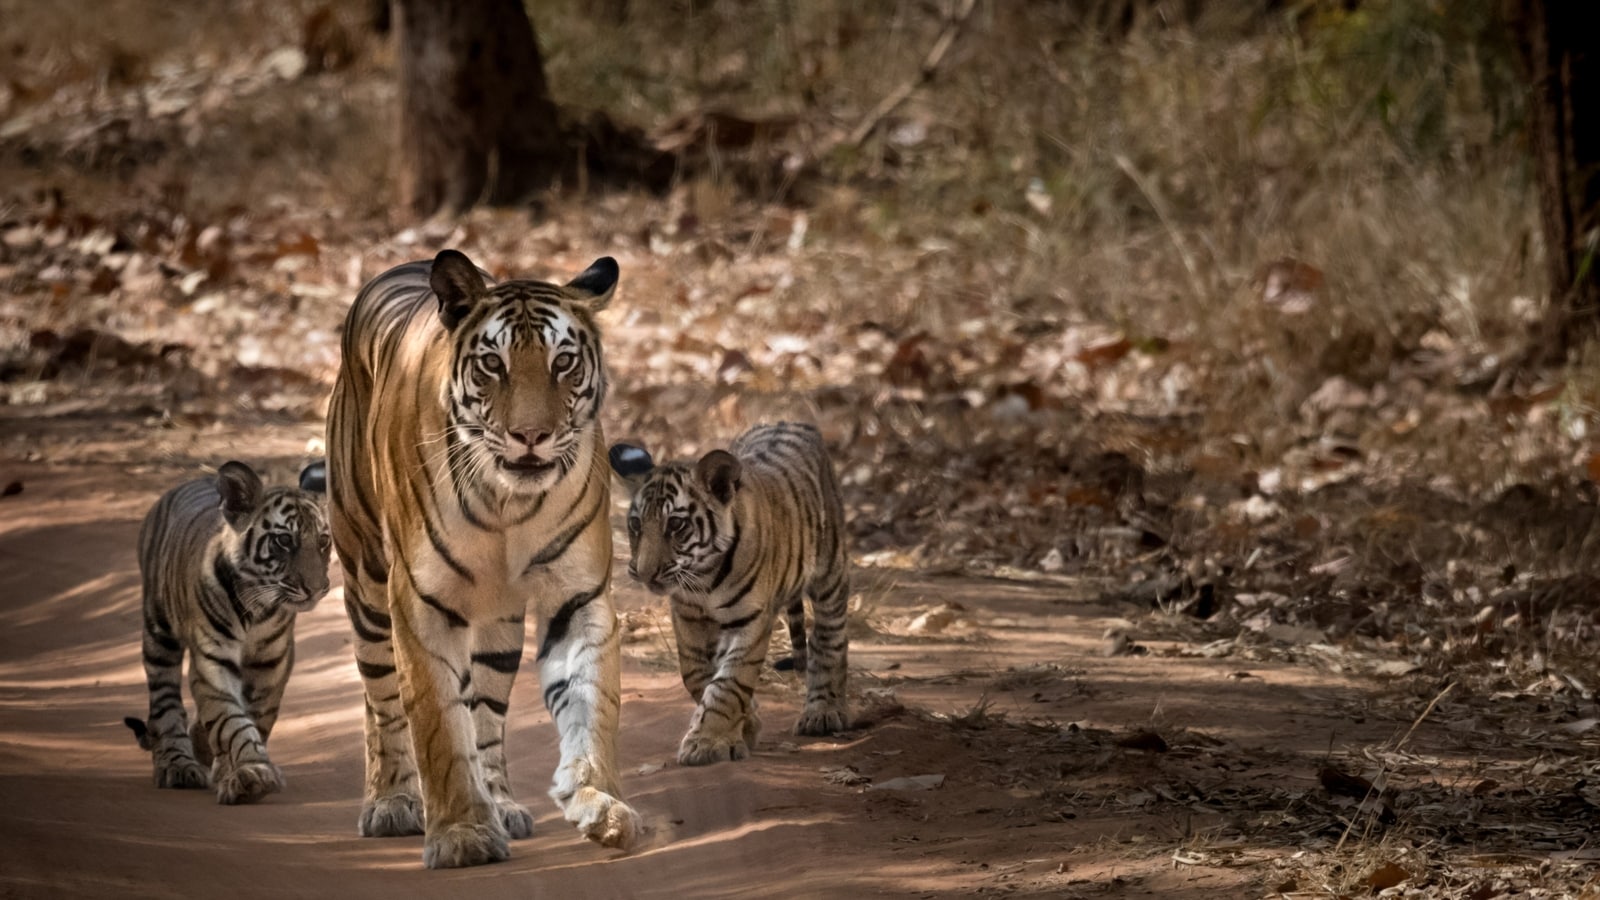 How many tigers can India's forests sustain? - Hindustan Times